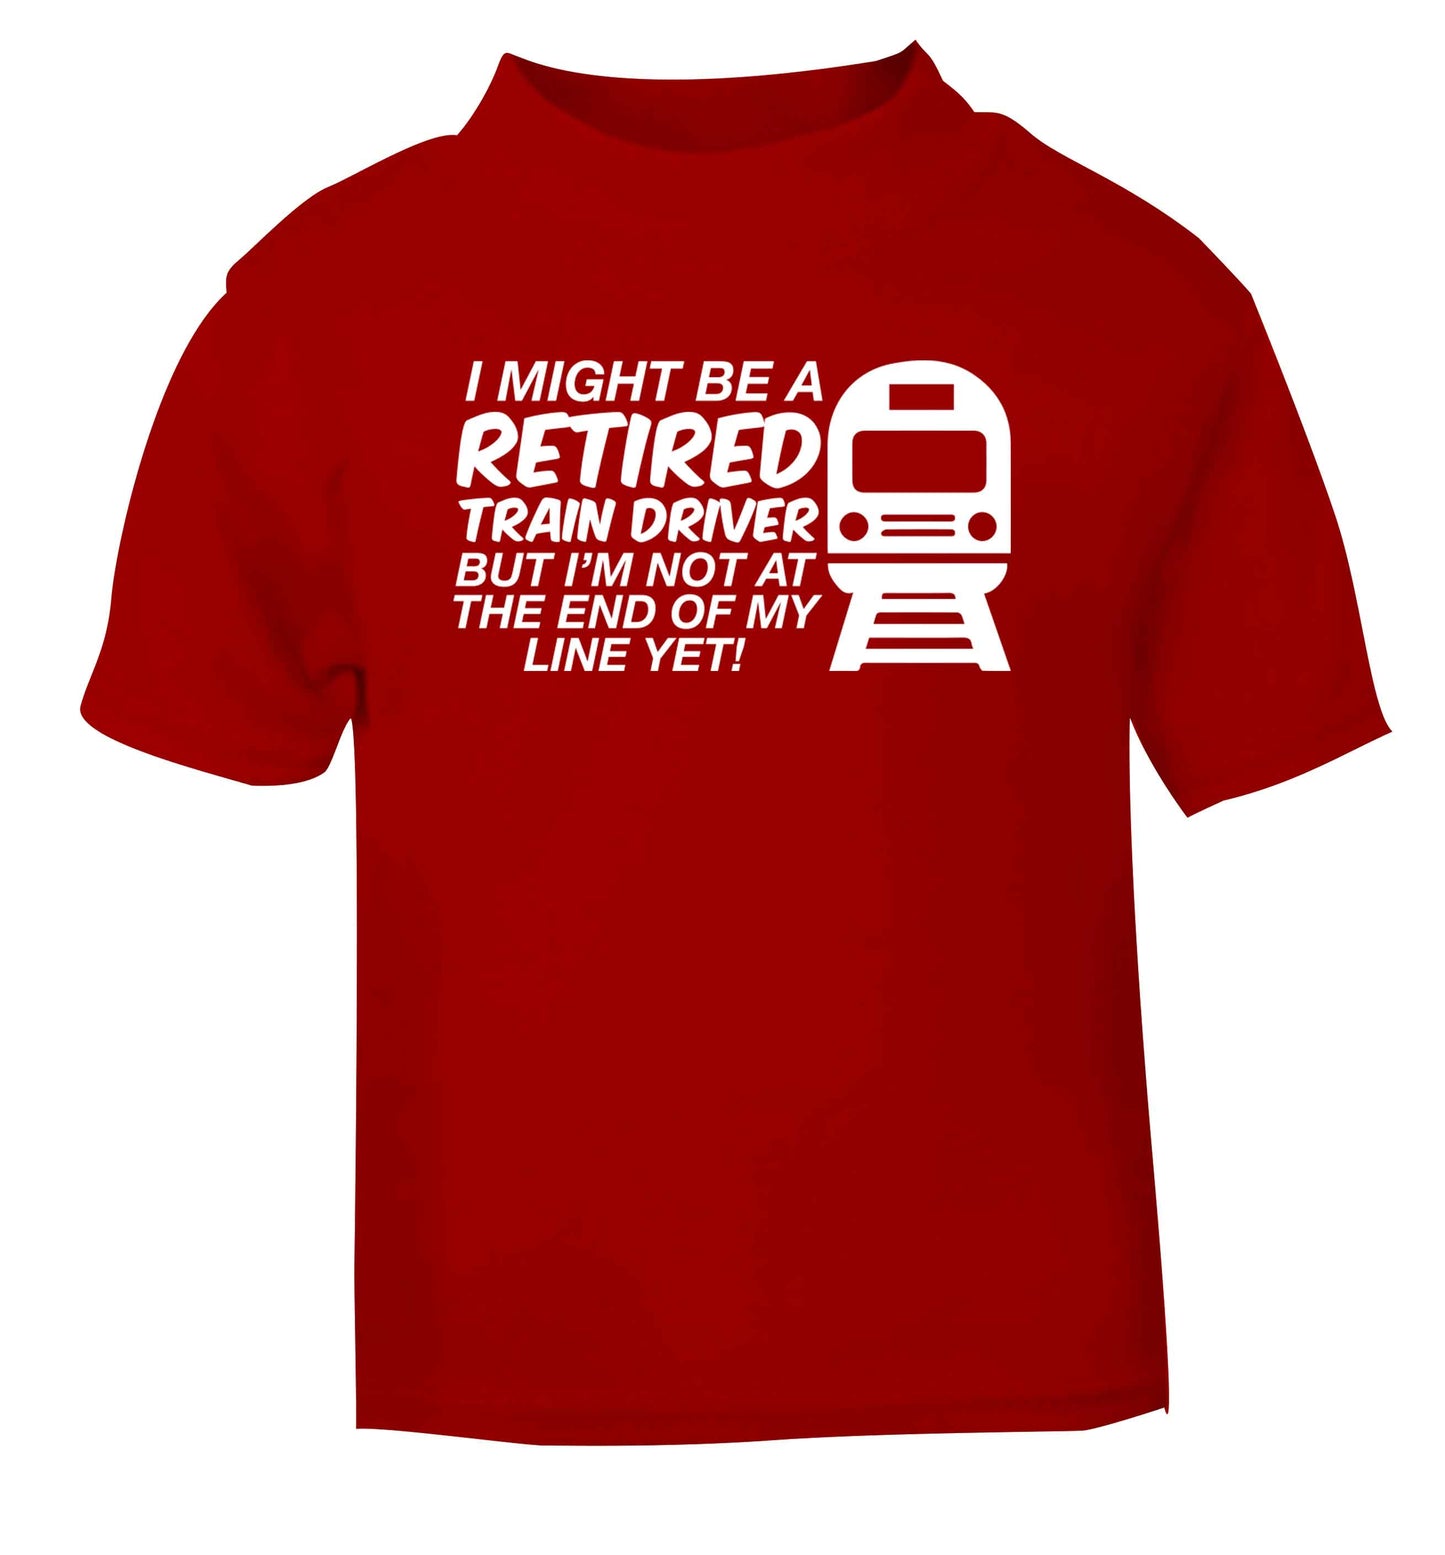 Retired train driver but I'm not at the end of my line yet red Baby Toddler Tshirt 2 Years